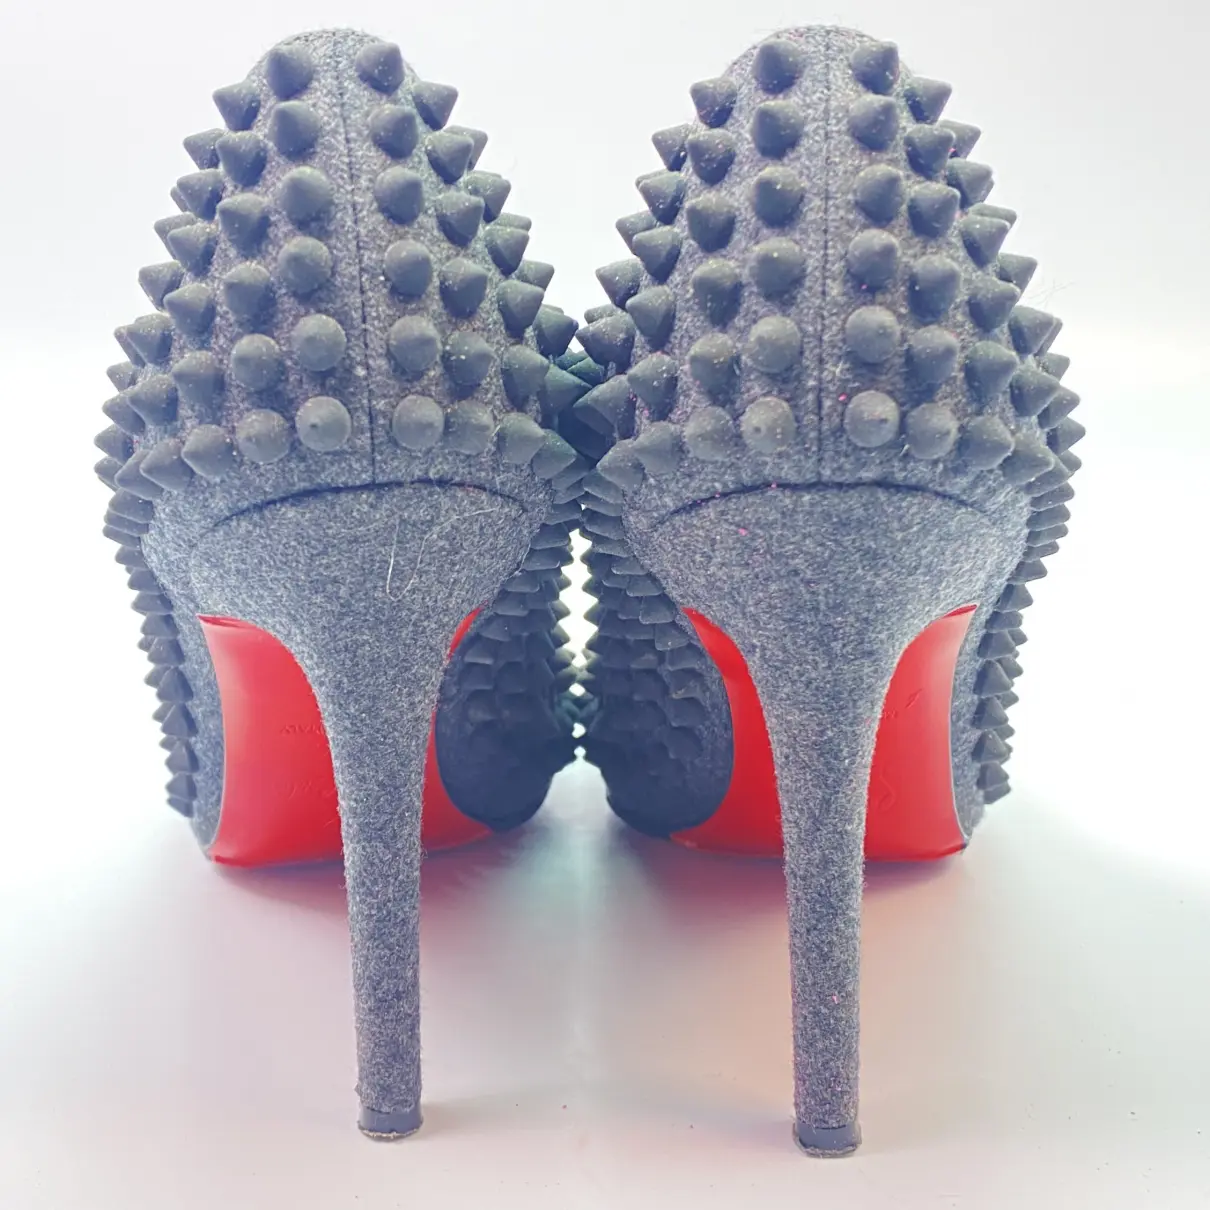 Pigalle cloth heels Christian Louboutin